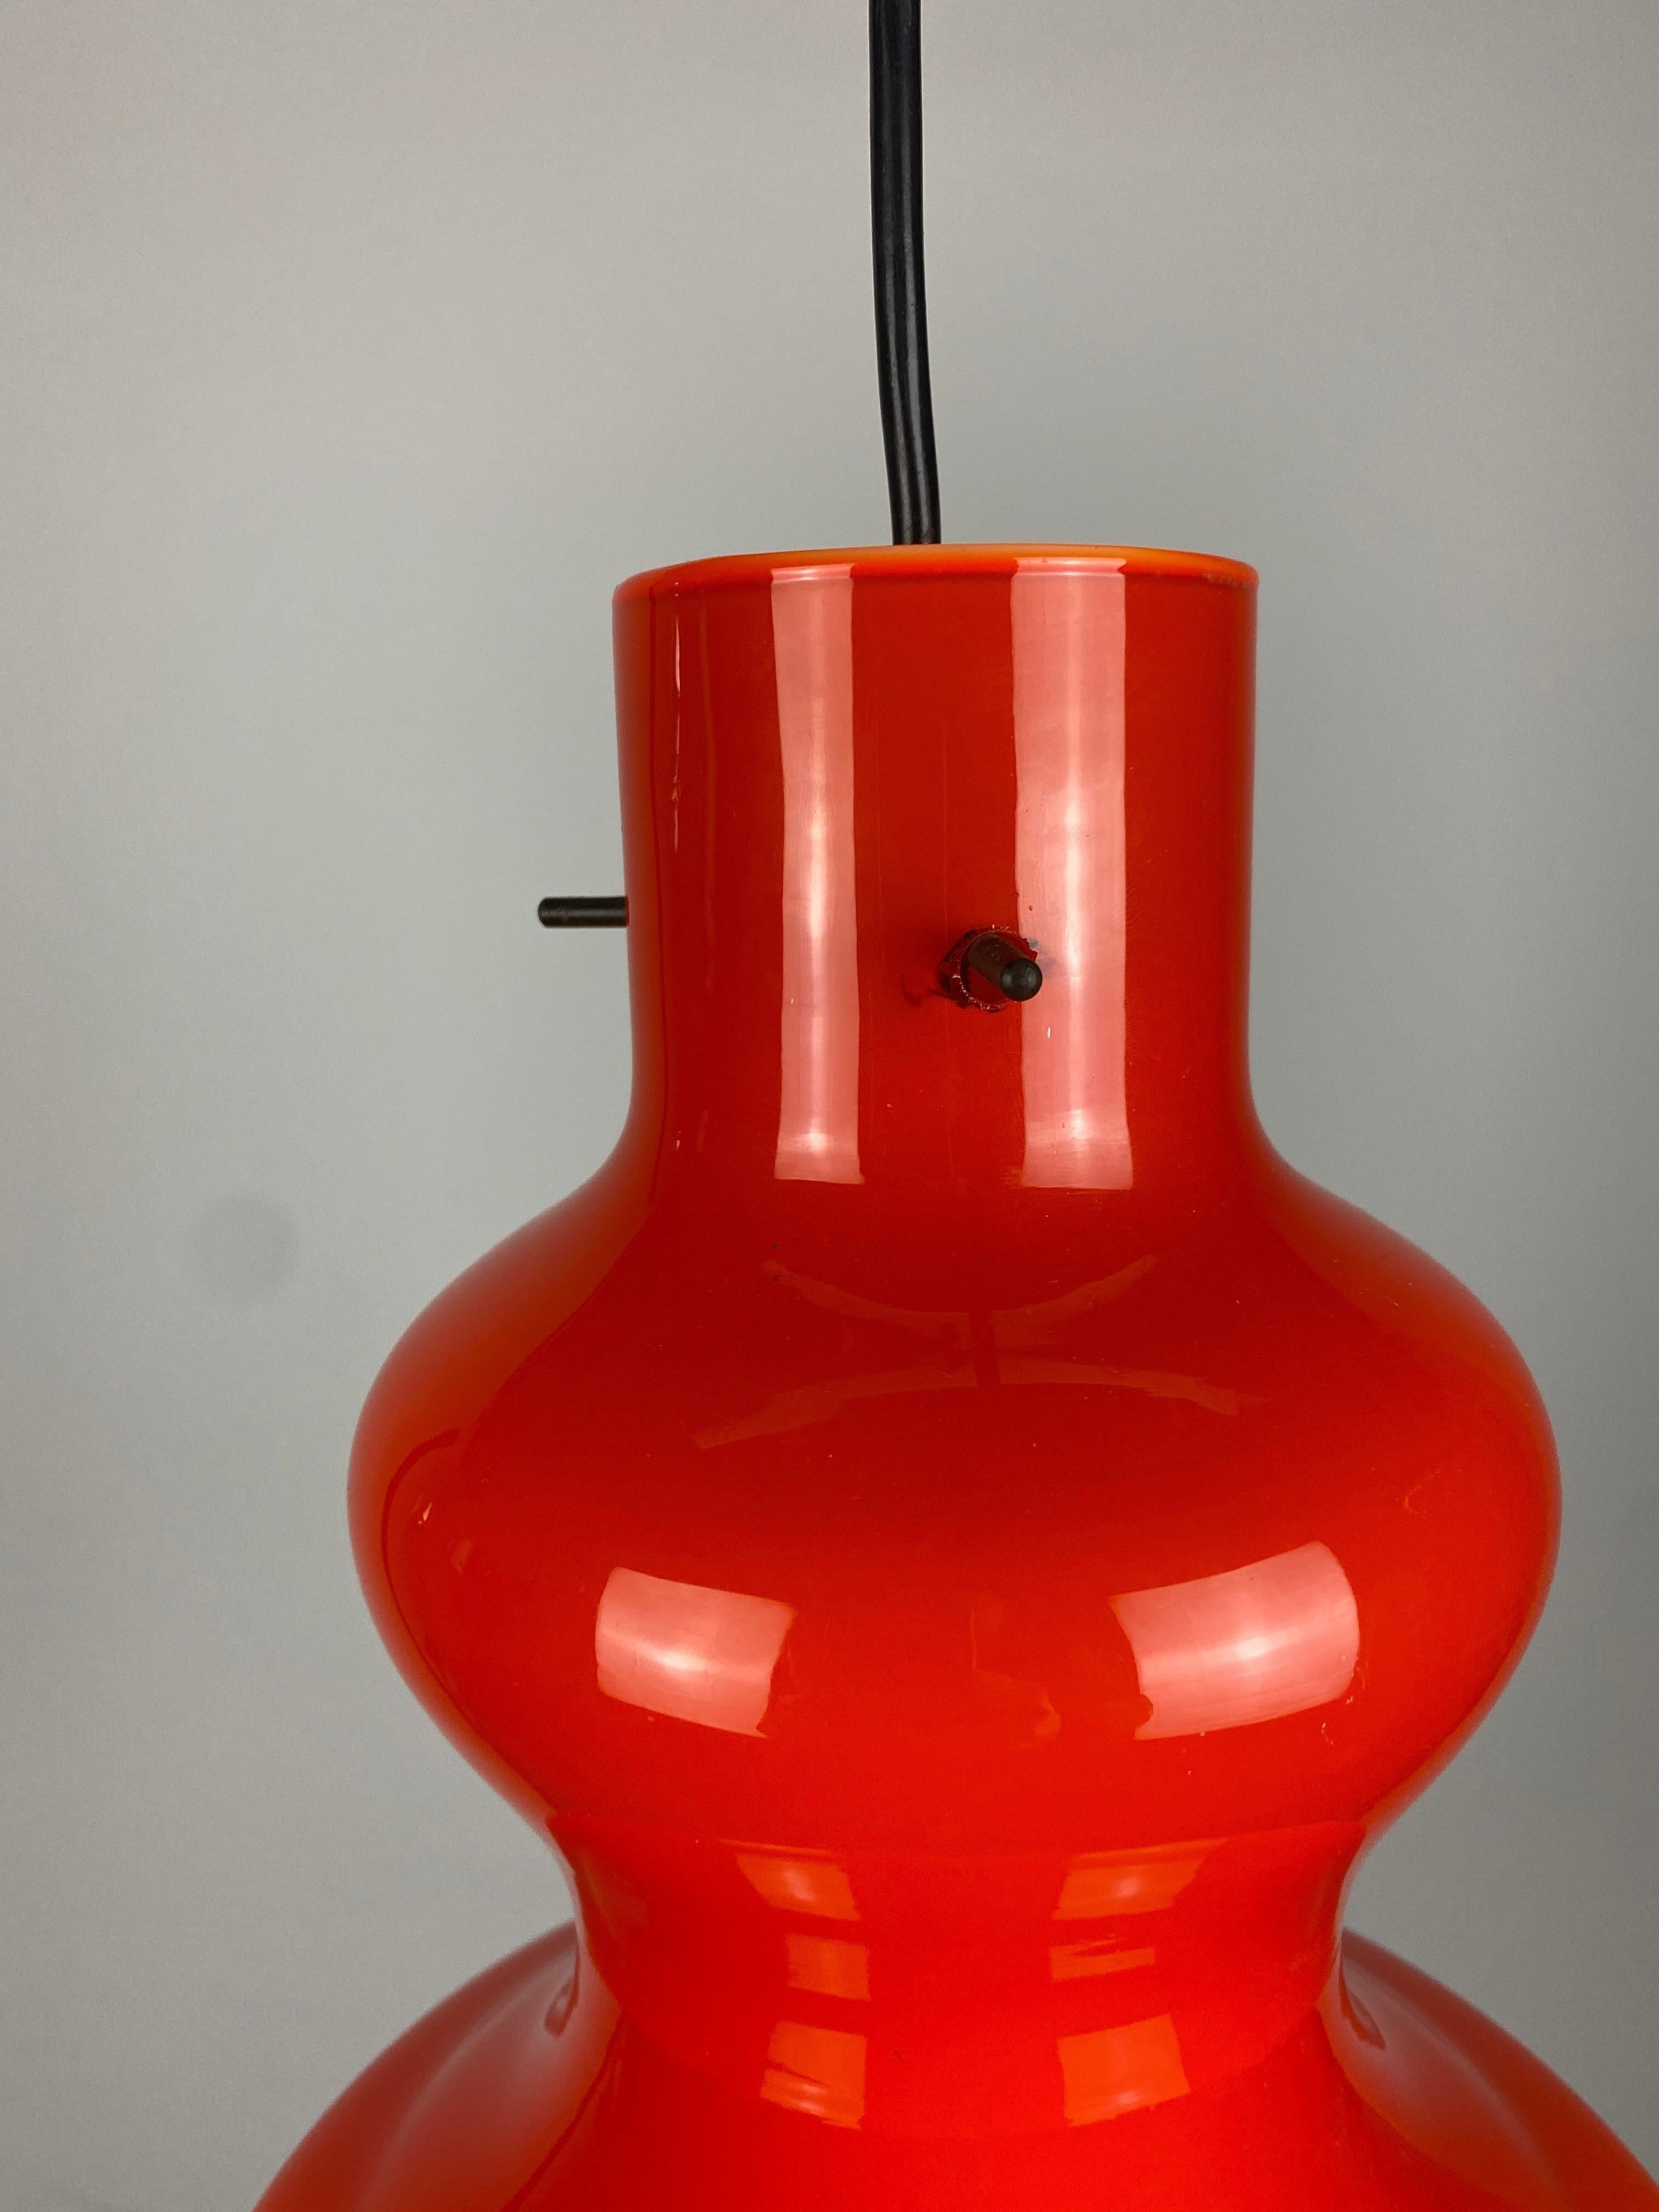 Italian pendant light by Gino Vistosi Vetreria for Massimo Vignelli. From around 1960. Made from Murano glass Has a nice bright orange color and gives a very warm light. 

DIMENSIONS
Height: 29cm
Diameter: 22cm
Cord length: 30cm
PRODUCT